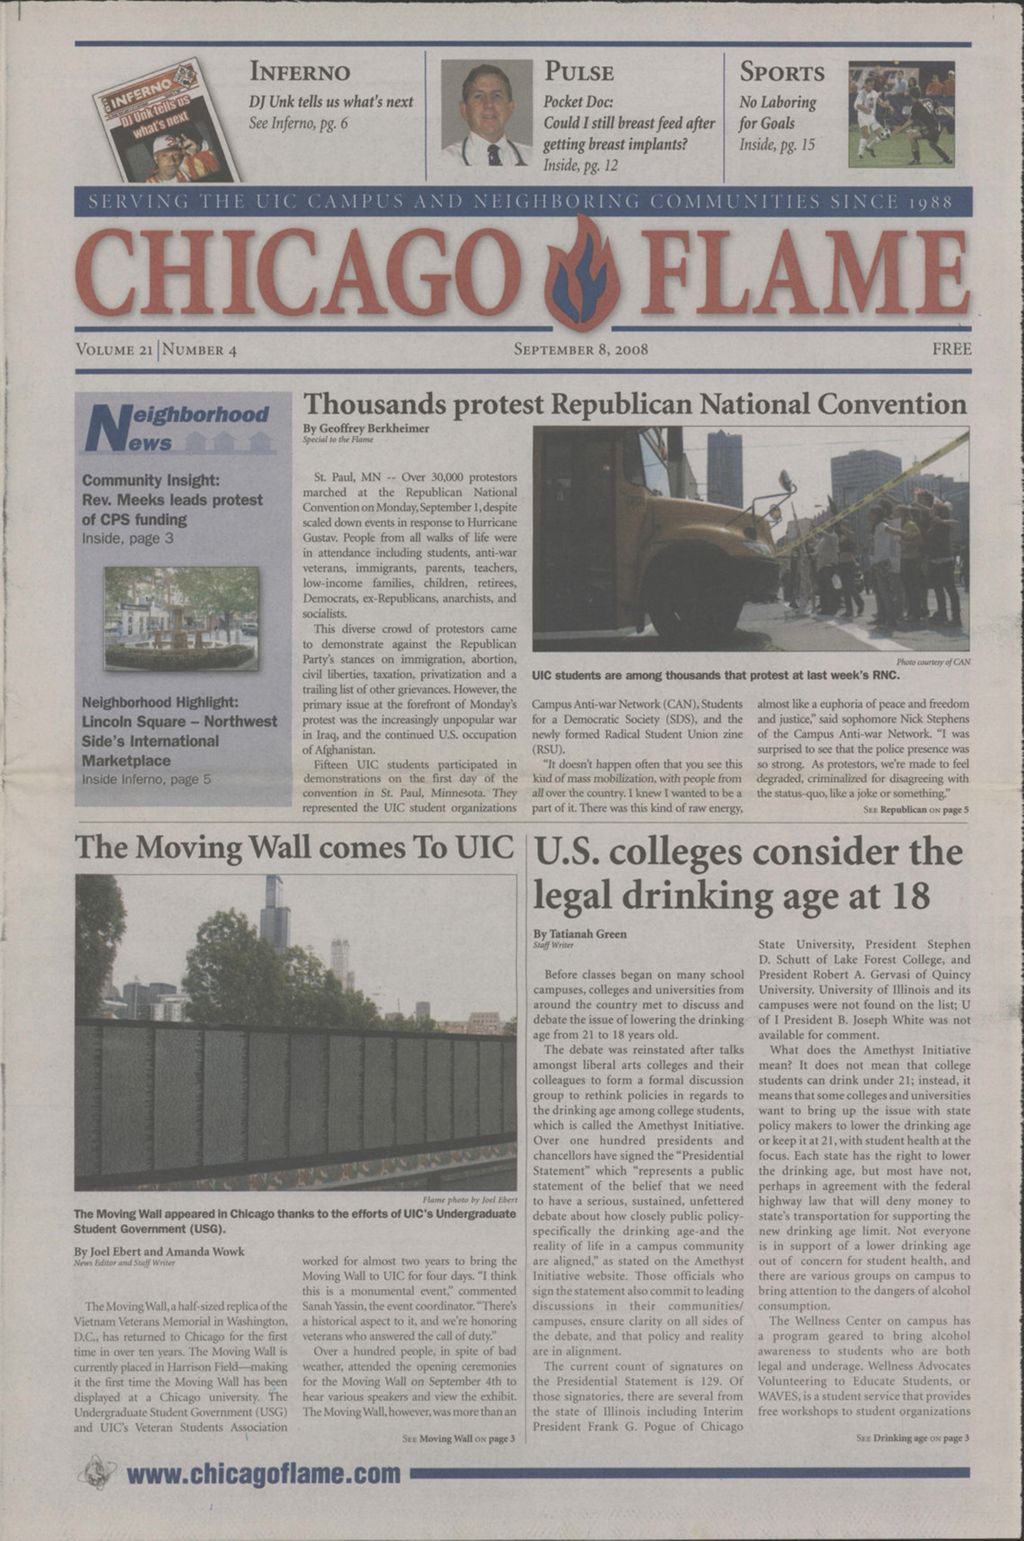 Miniature of Chicago Flame (September 8, 2008)